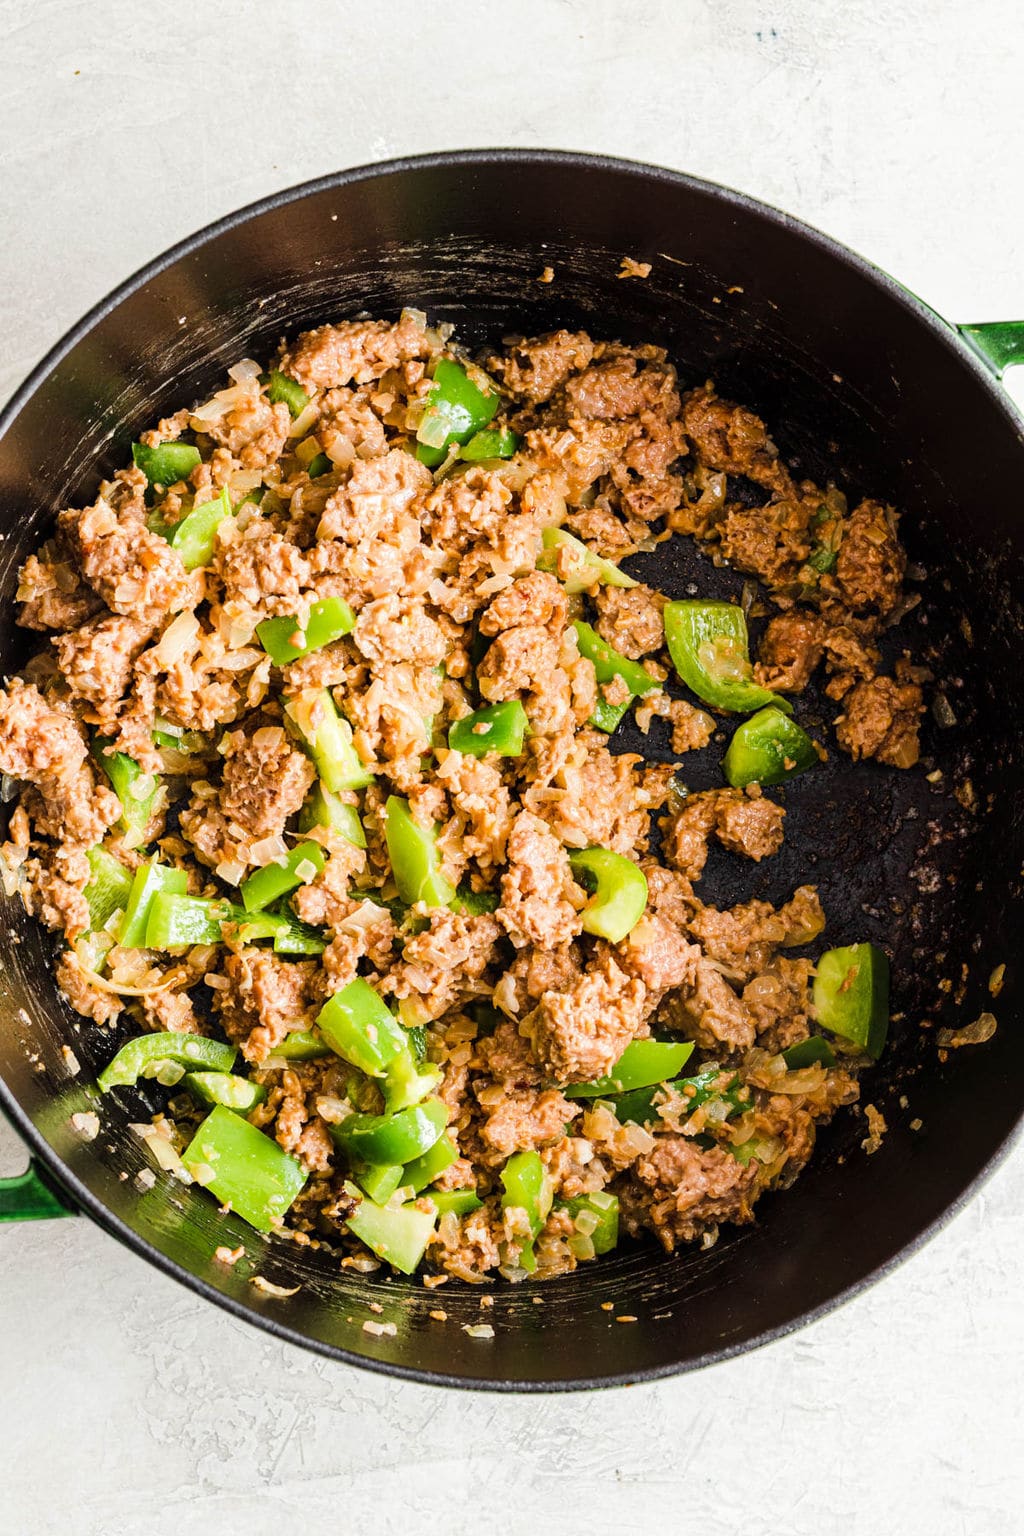 sautéing vegan ground beef and green peppers in a large black pot.